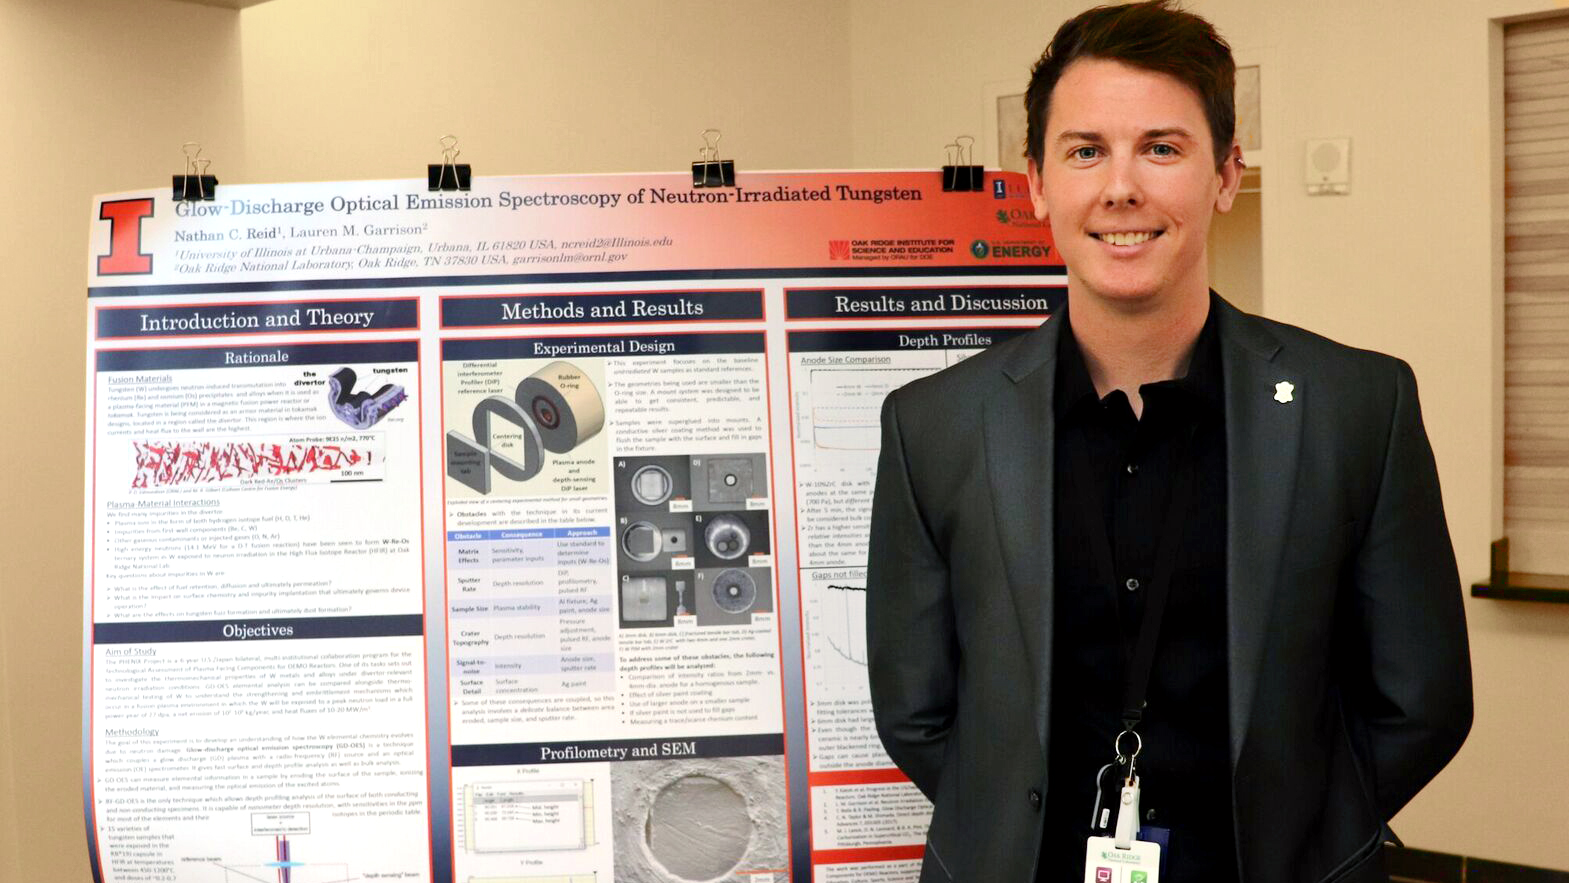 NPRE graduate student wins First Place in ORNL poster session